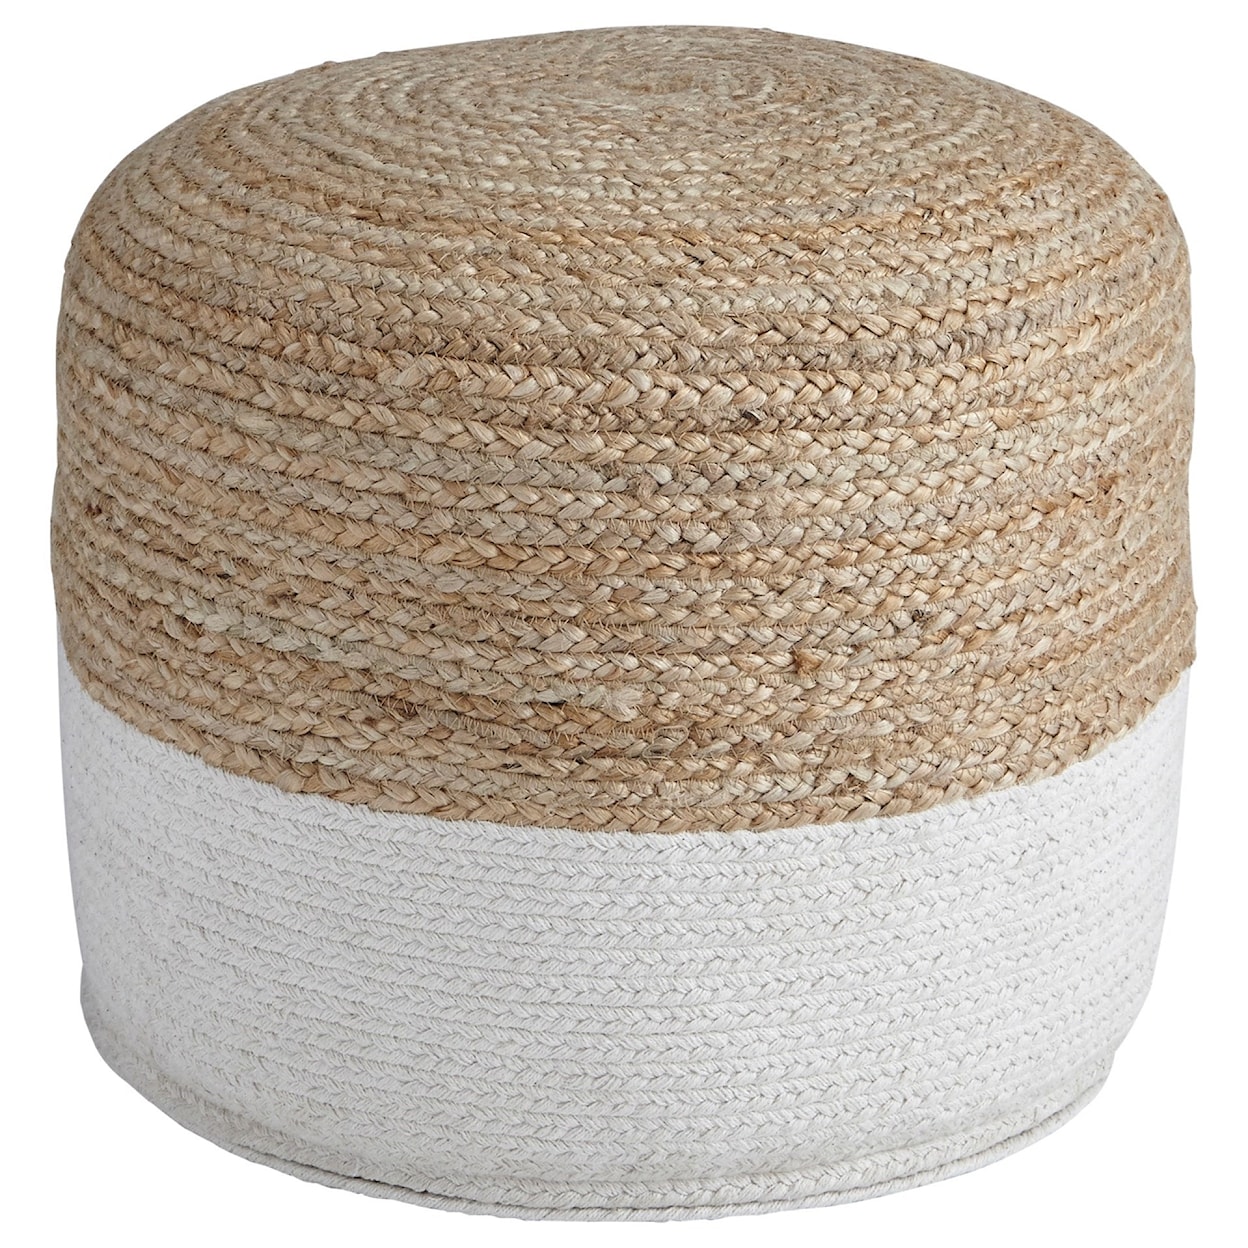 Signature Design Poufs Sweed Valley - Natural/White Pouf